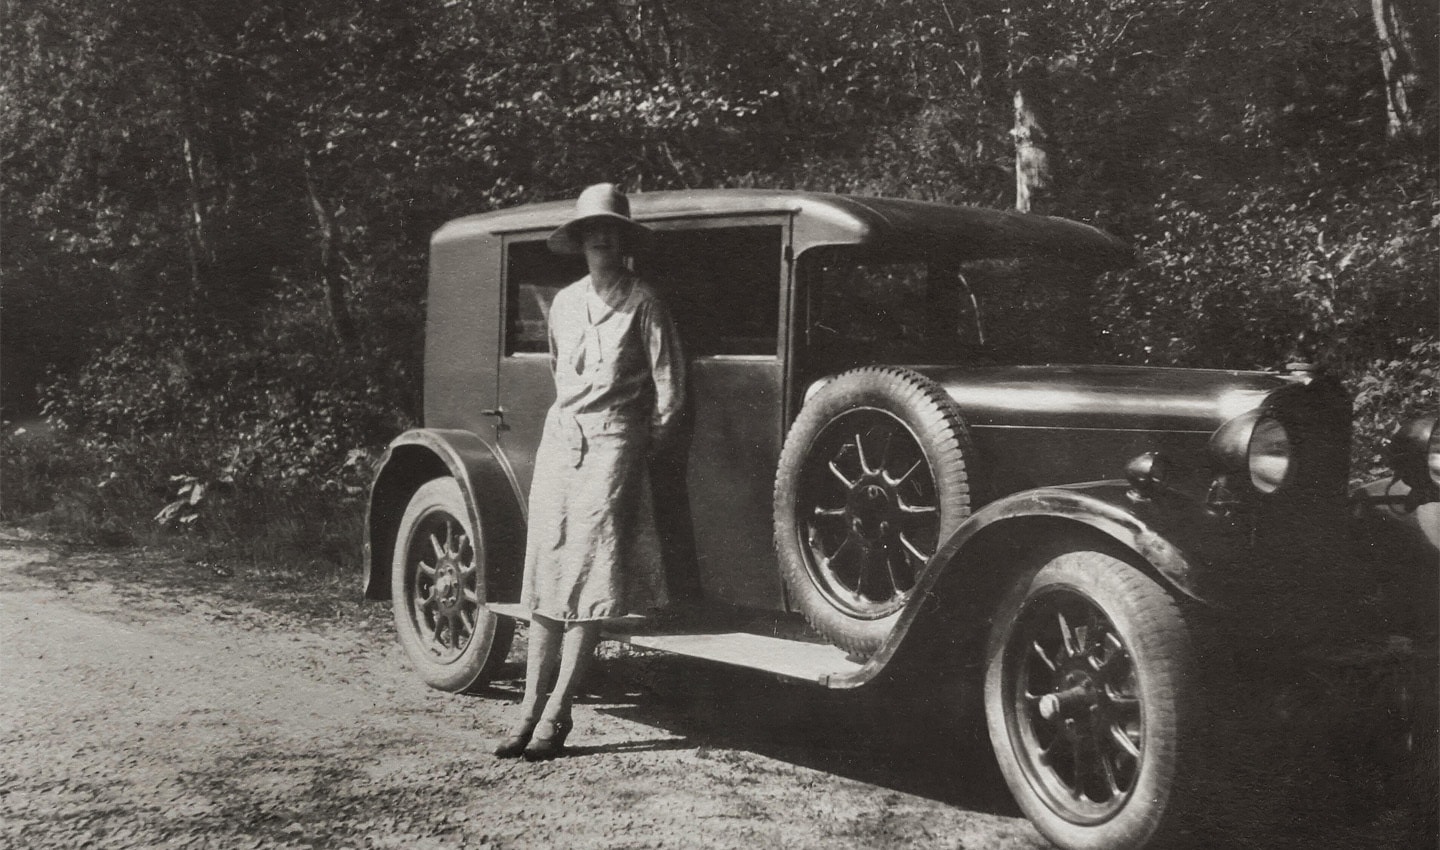 Women didn’t want a car with short range and slow speed. They wanted the same kind of transportation as men.